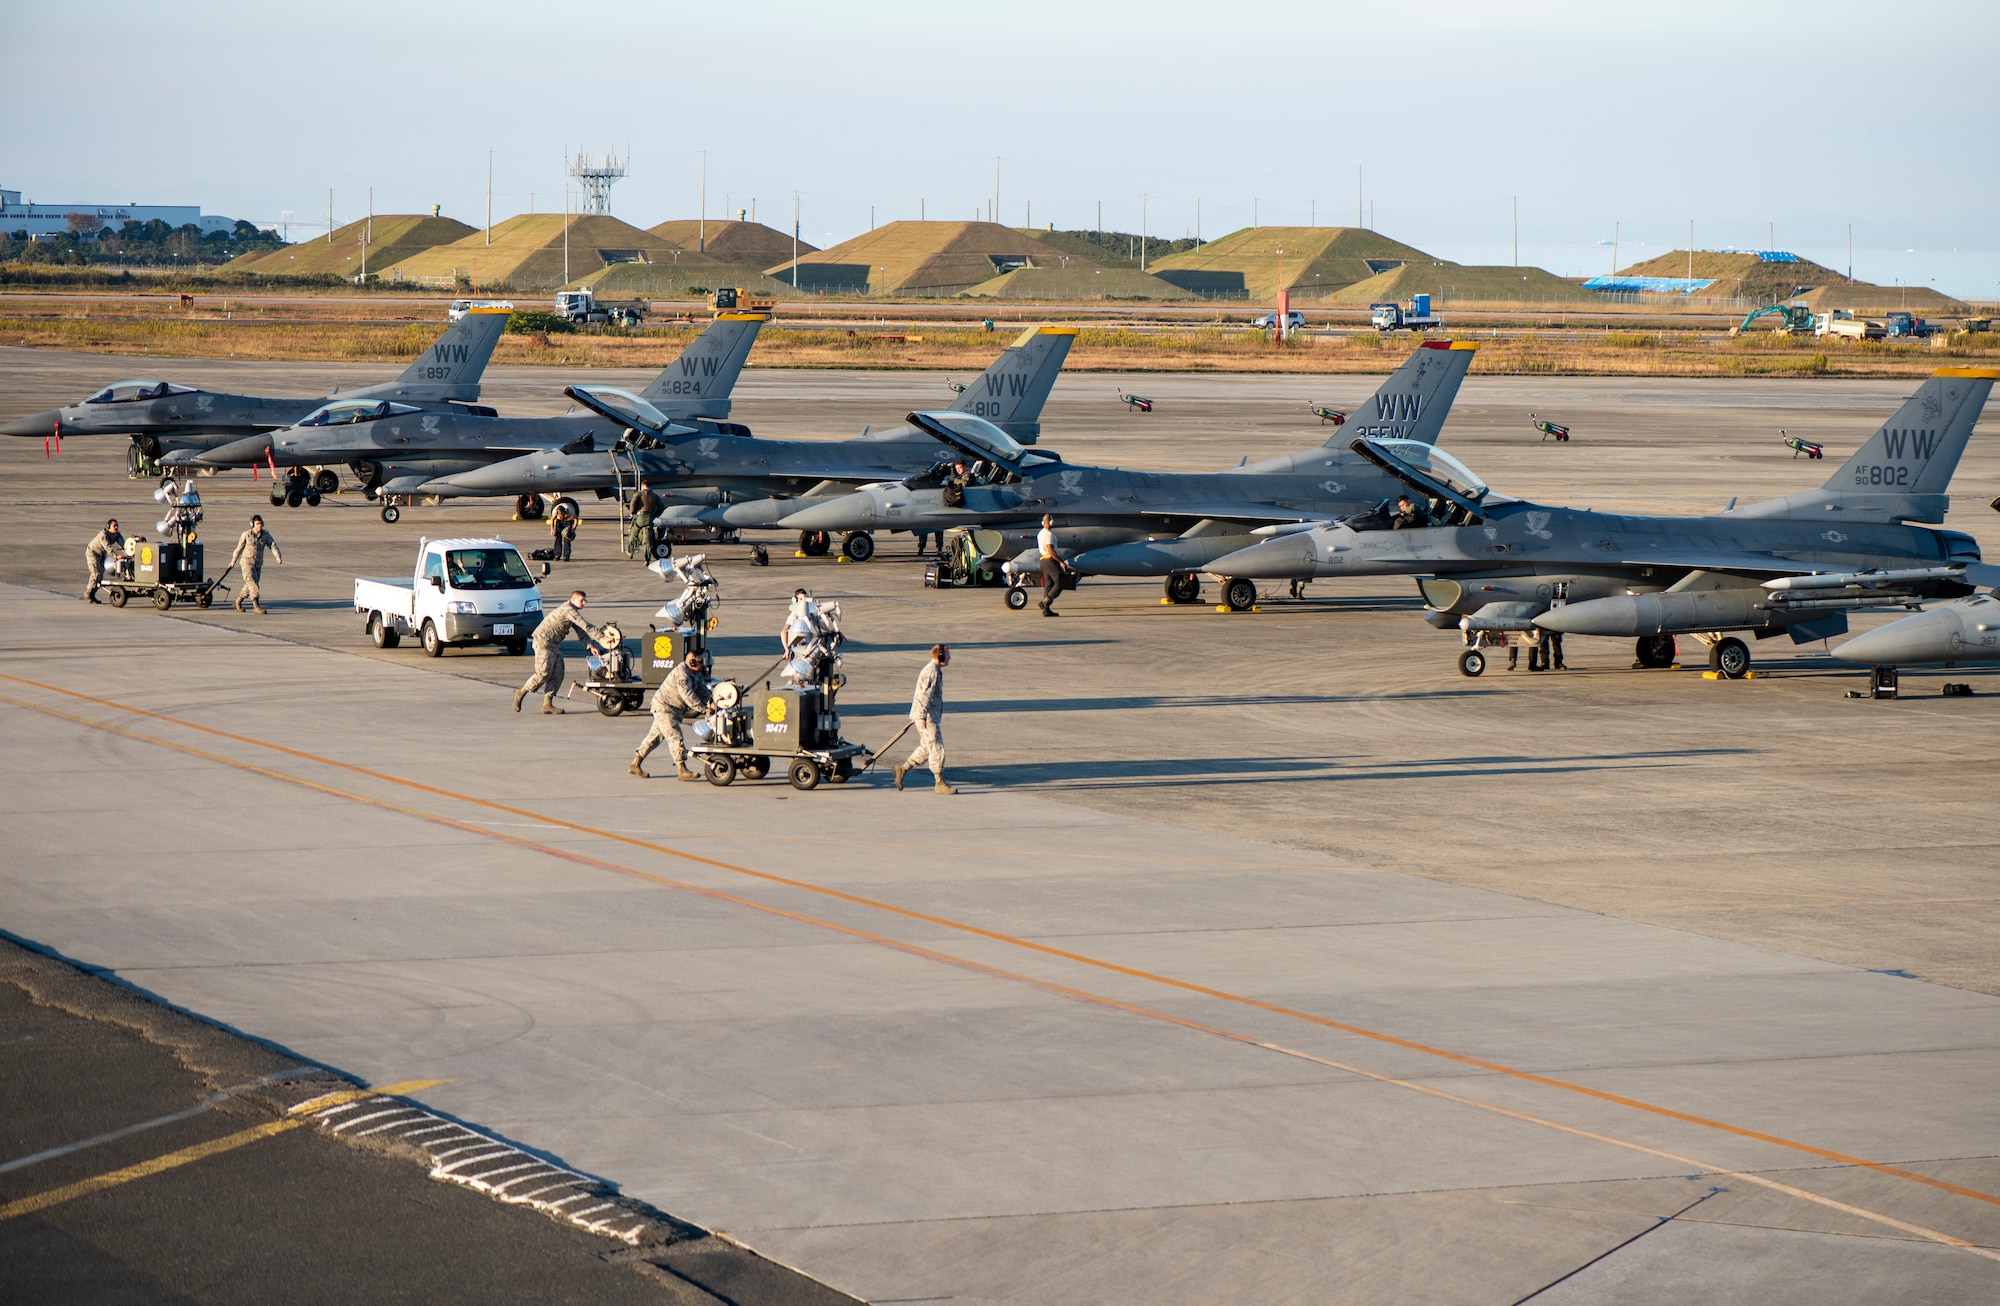 The 35th Fighter Wing participated in an aviation training relocation at Tsuiki Air Base, Japan, Nov. 5-8.